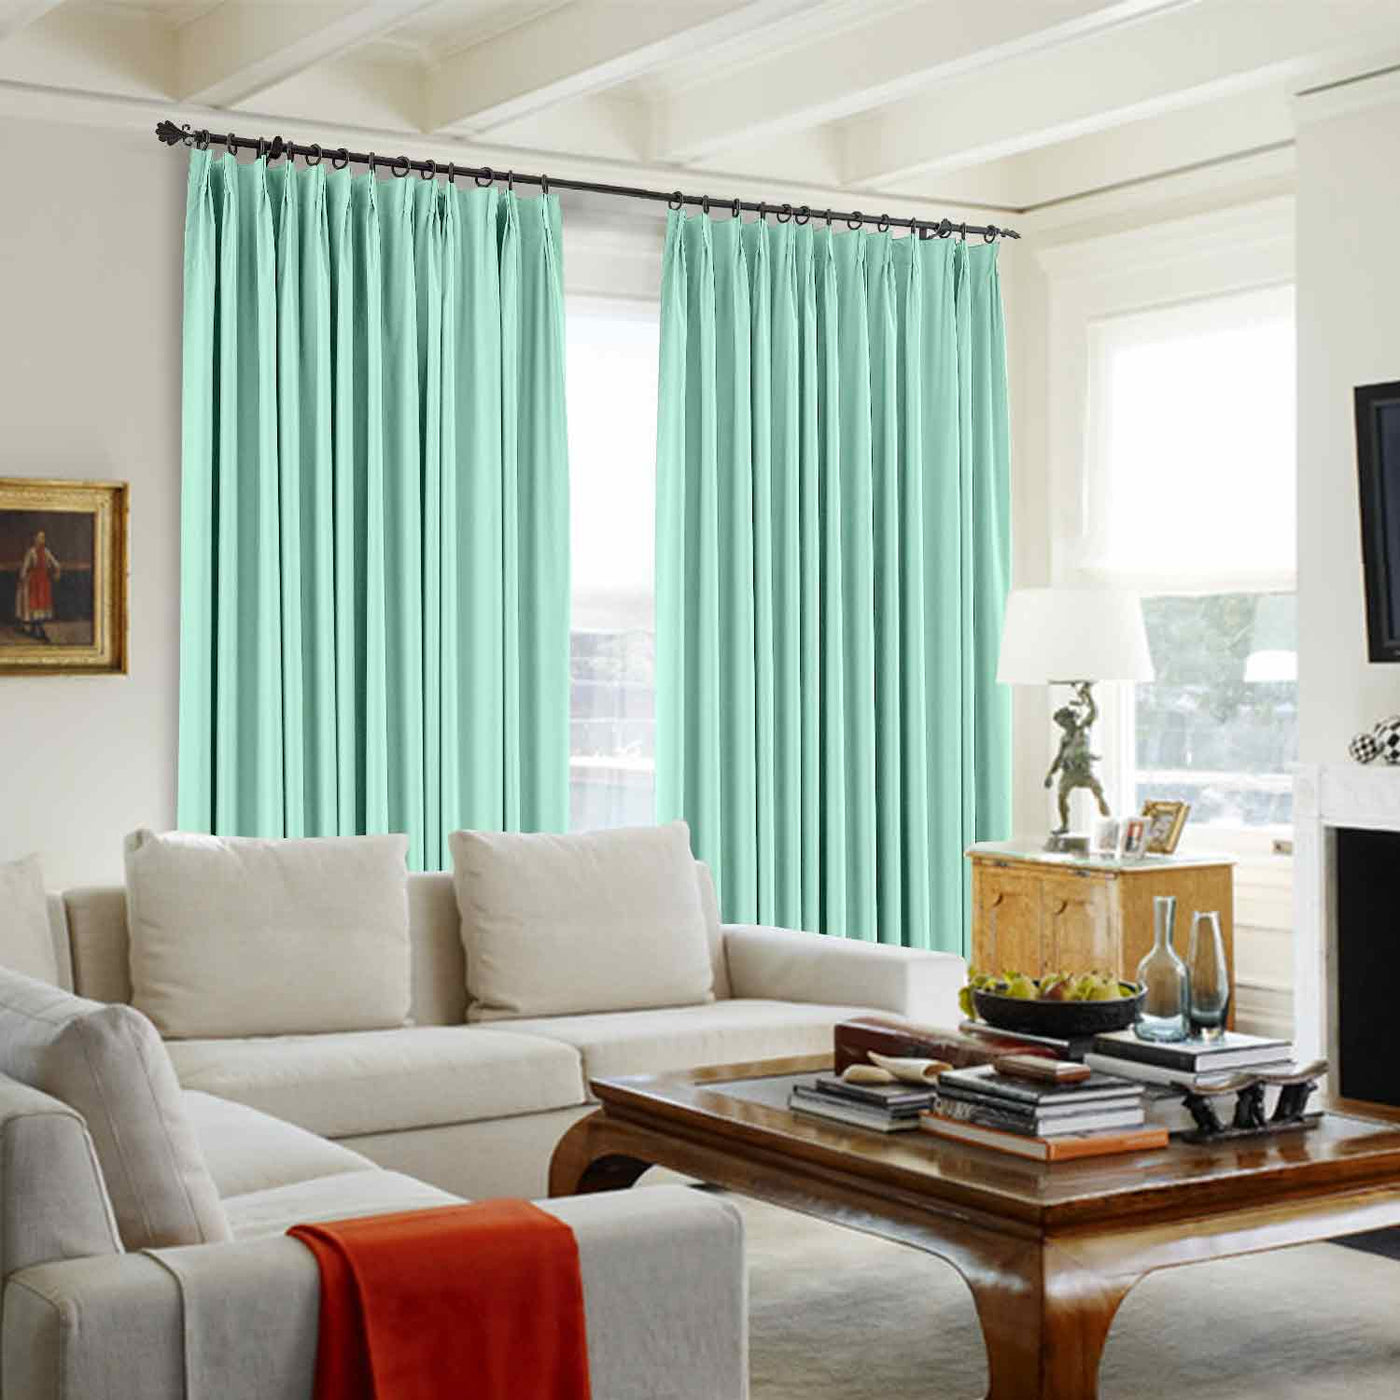 Saba Absolute Blackout Thermal Curtain with Foam Coated Grommet